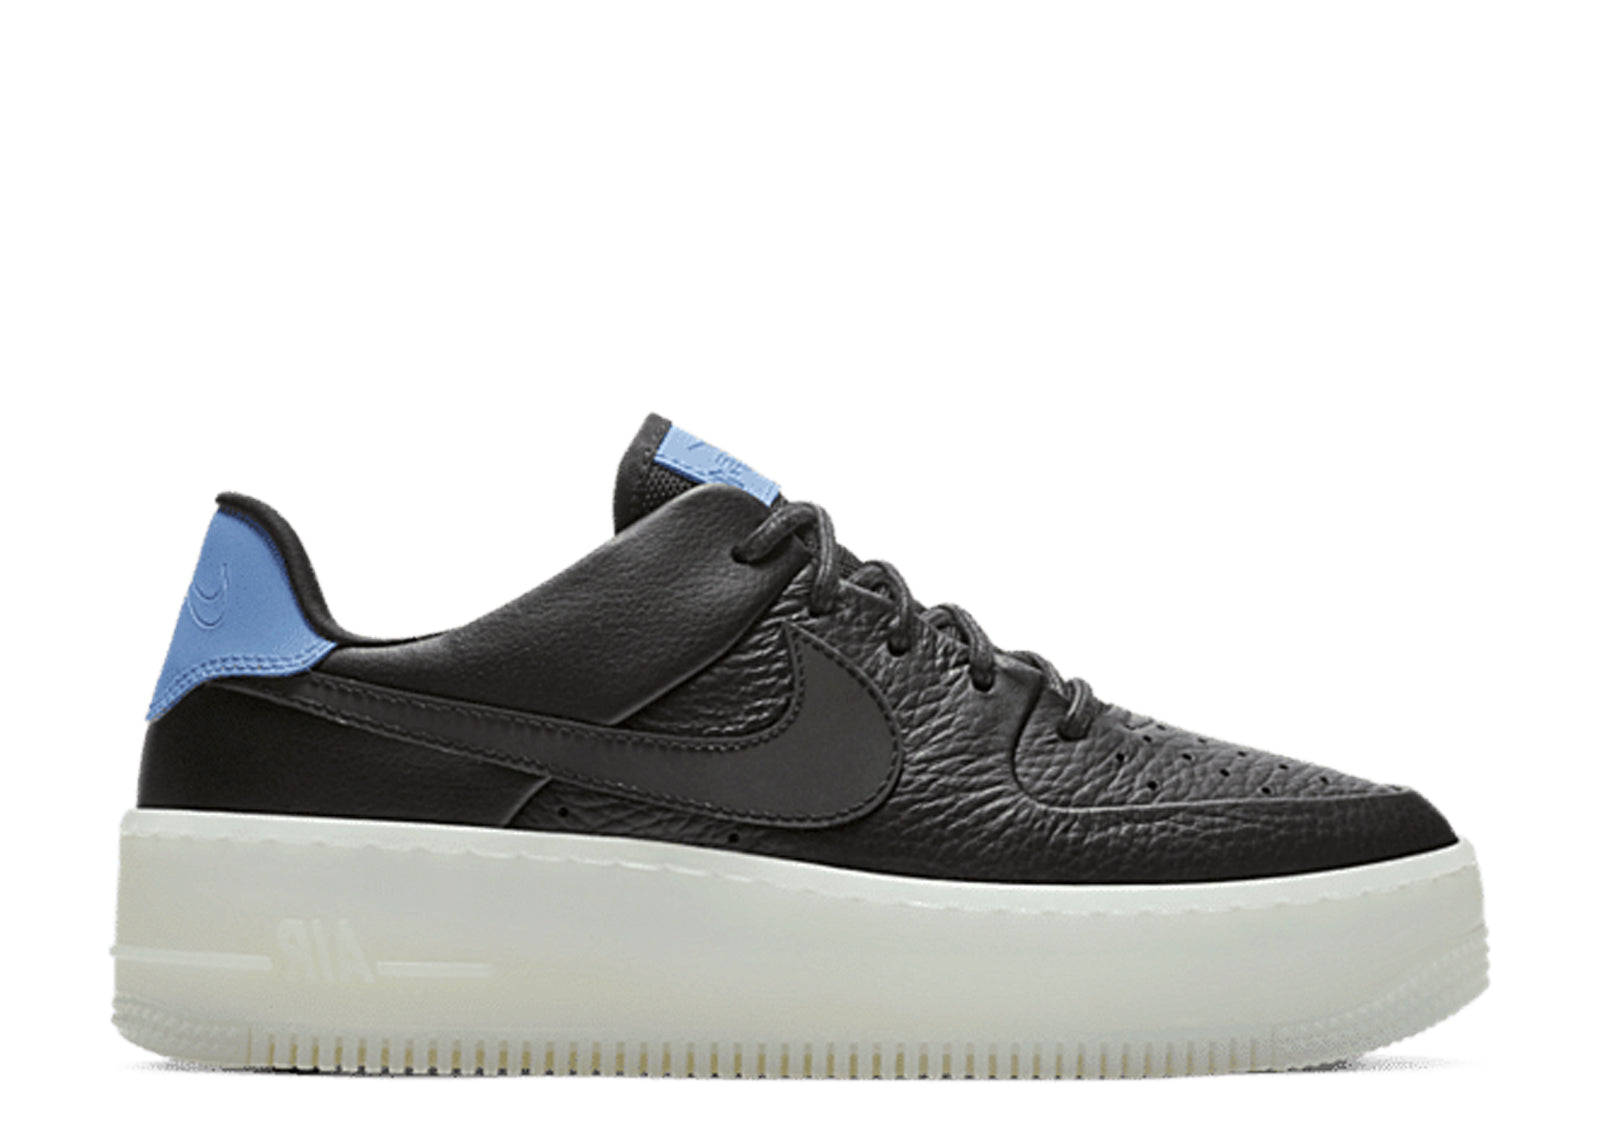 Second Chance - free Nike Air Force 1 Sage Low Black/Glace - 37,5 | NEW